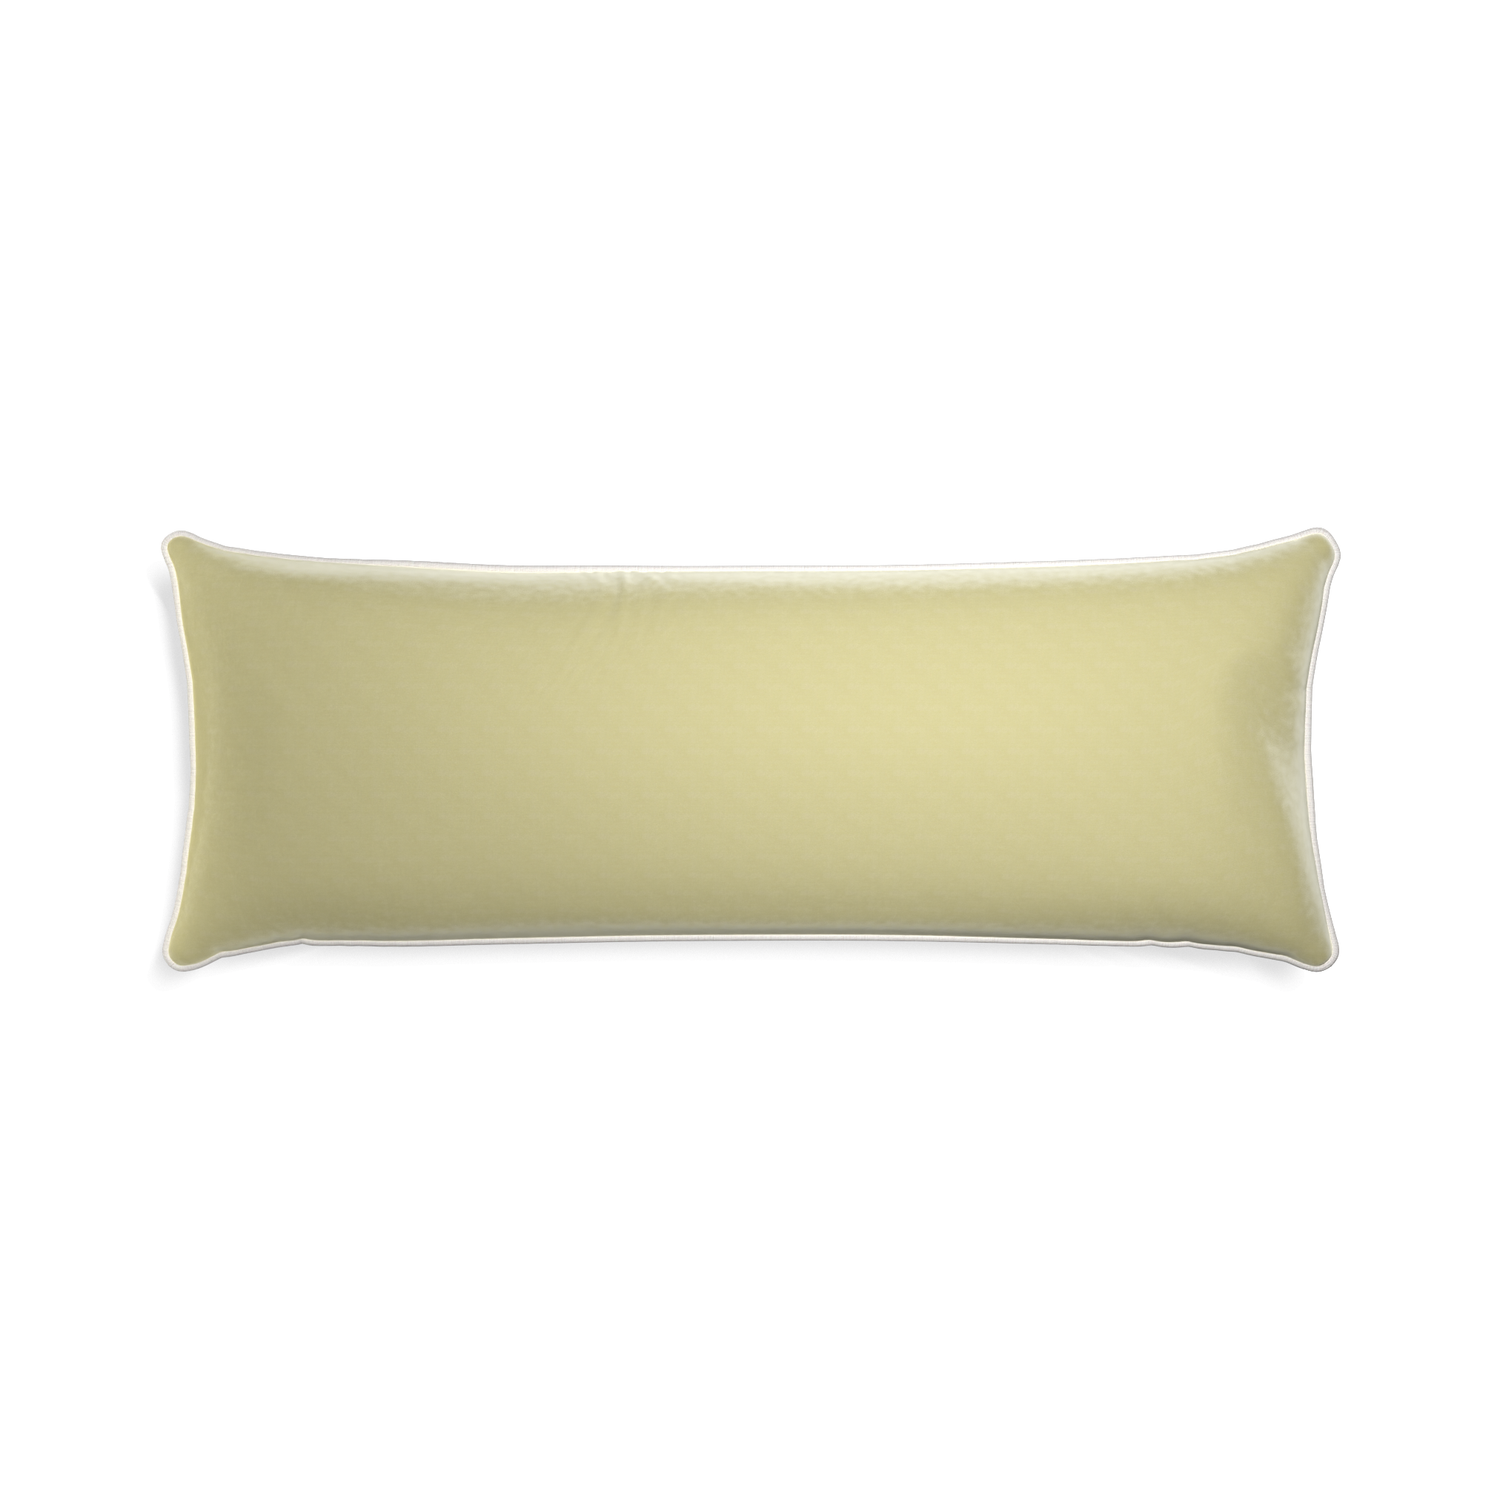 Xl-lumbar pear velvet custom pillow with snow piping on white background